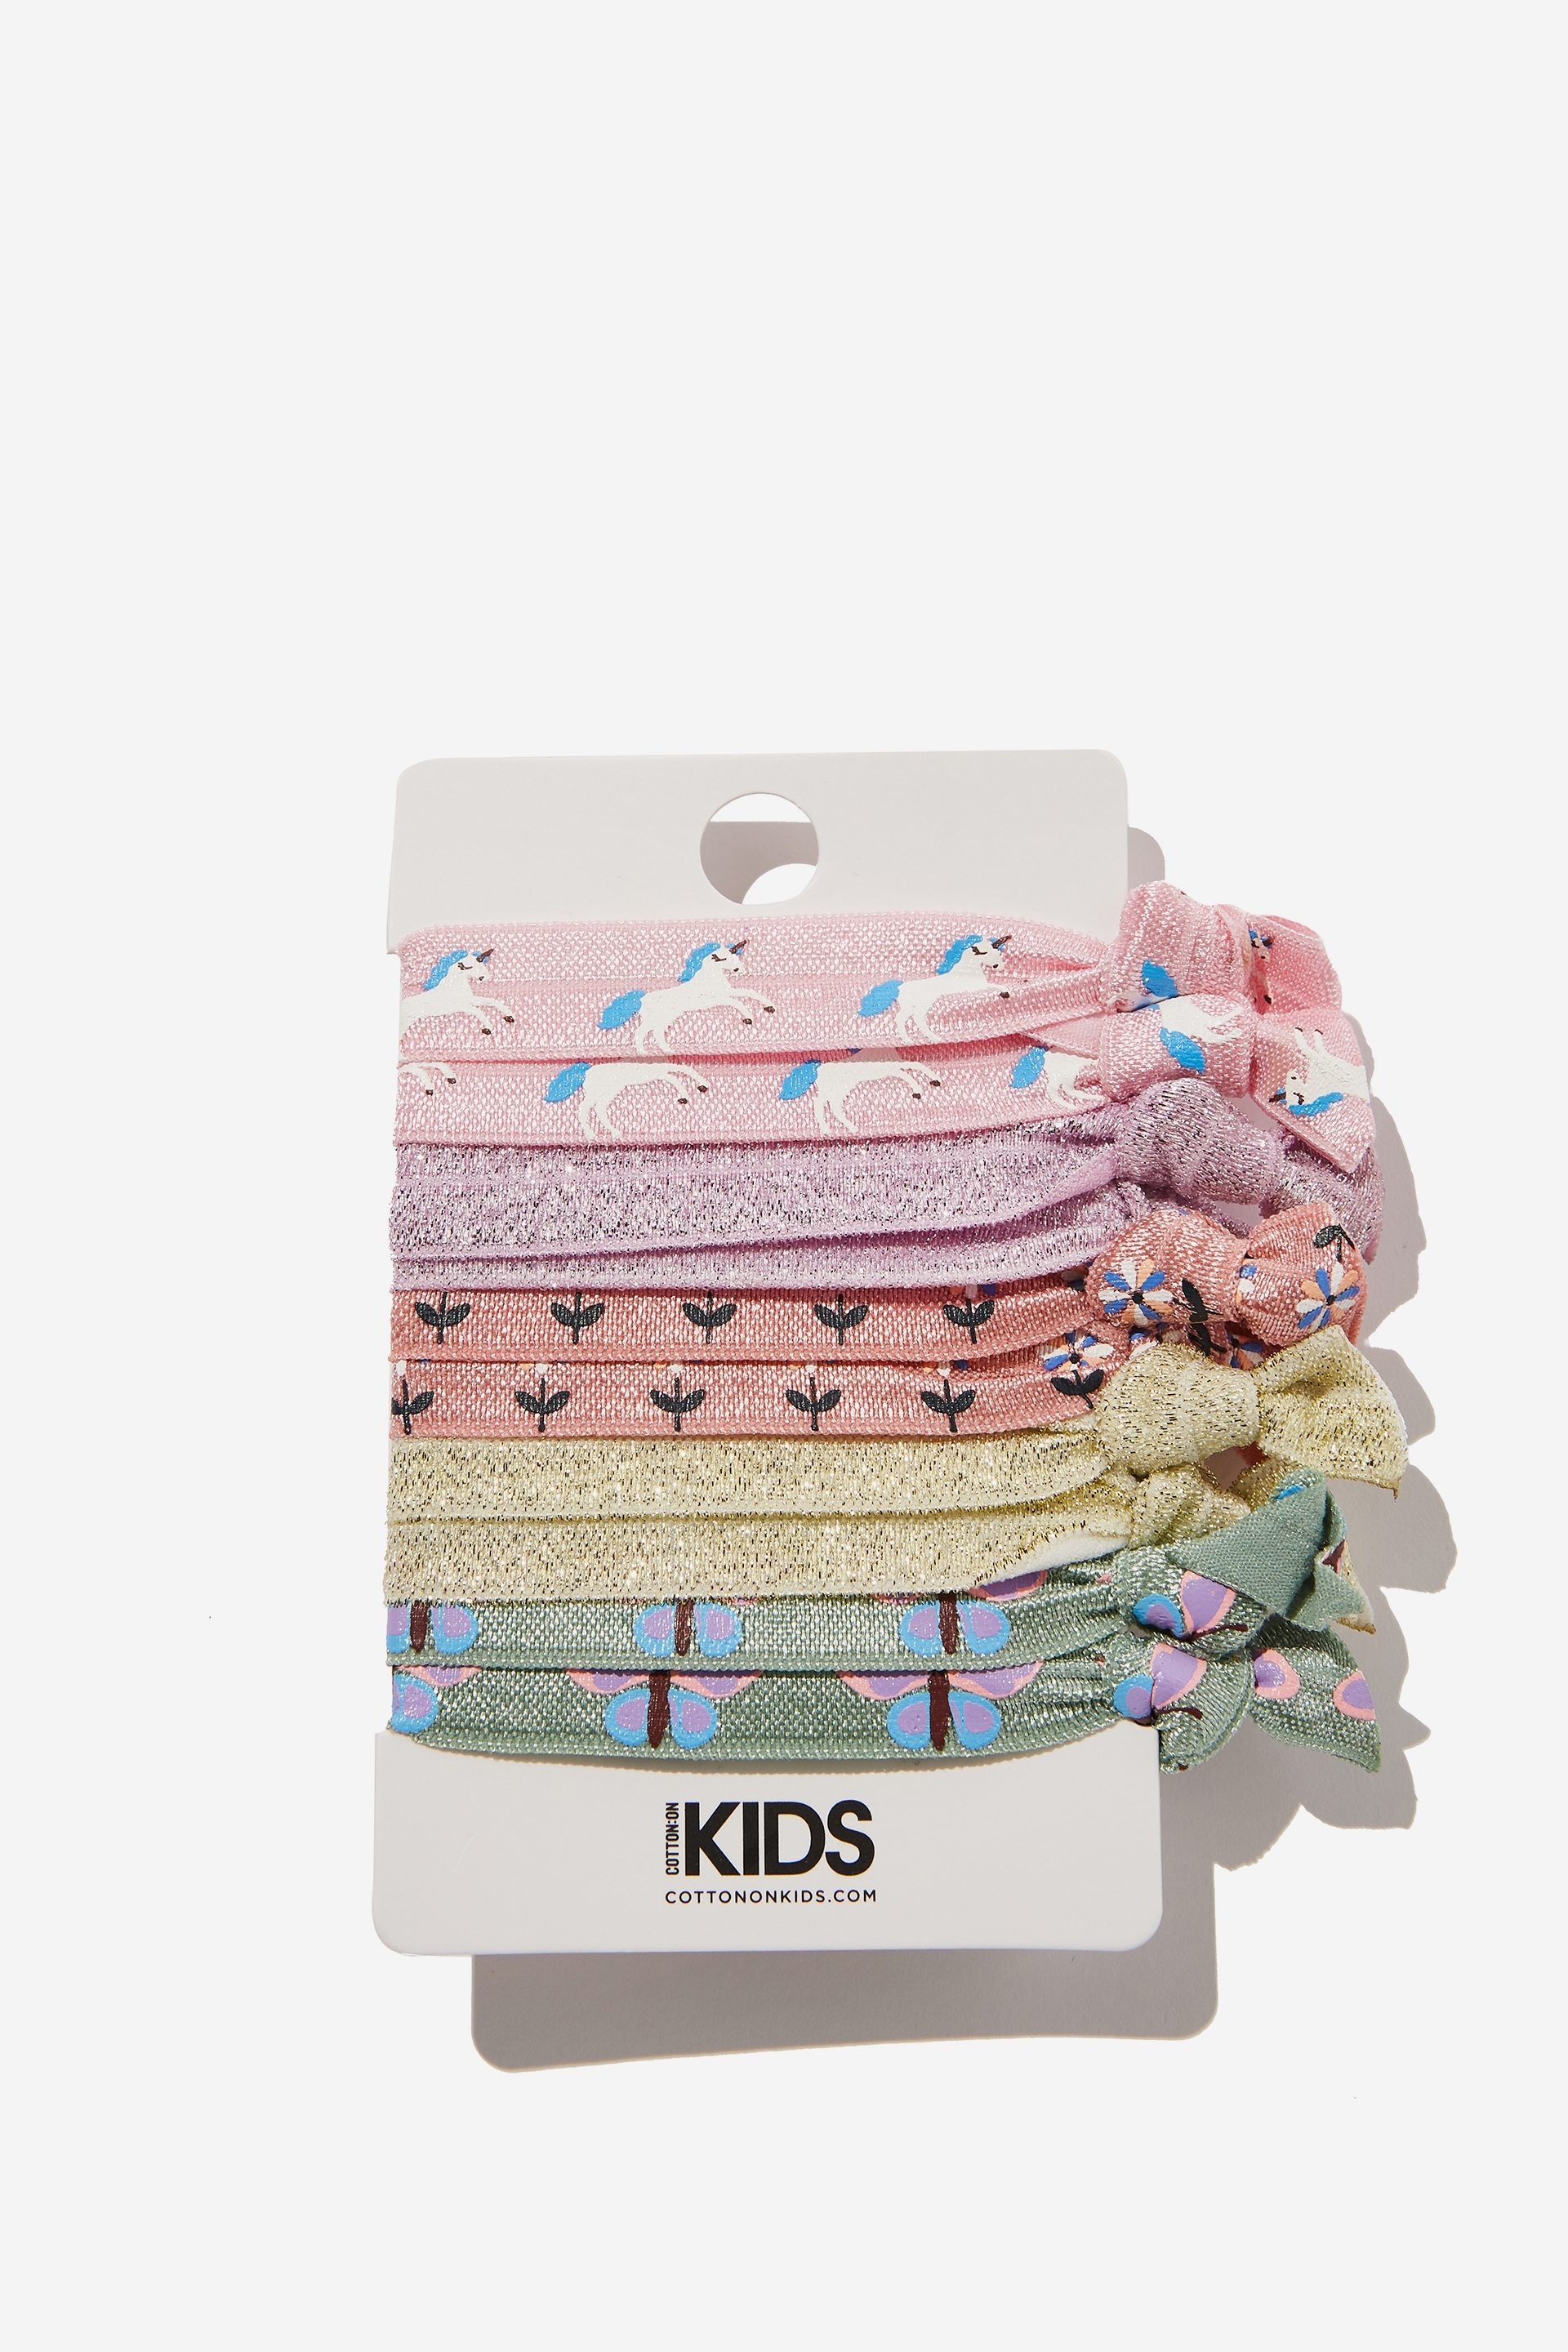 Cotton On Kids - Knot Messy Hair Ties - Unicorns and butterfly